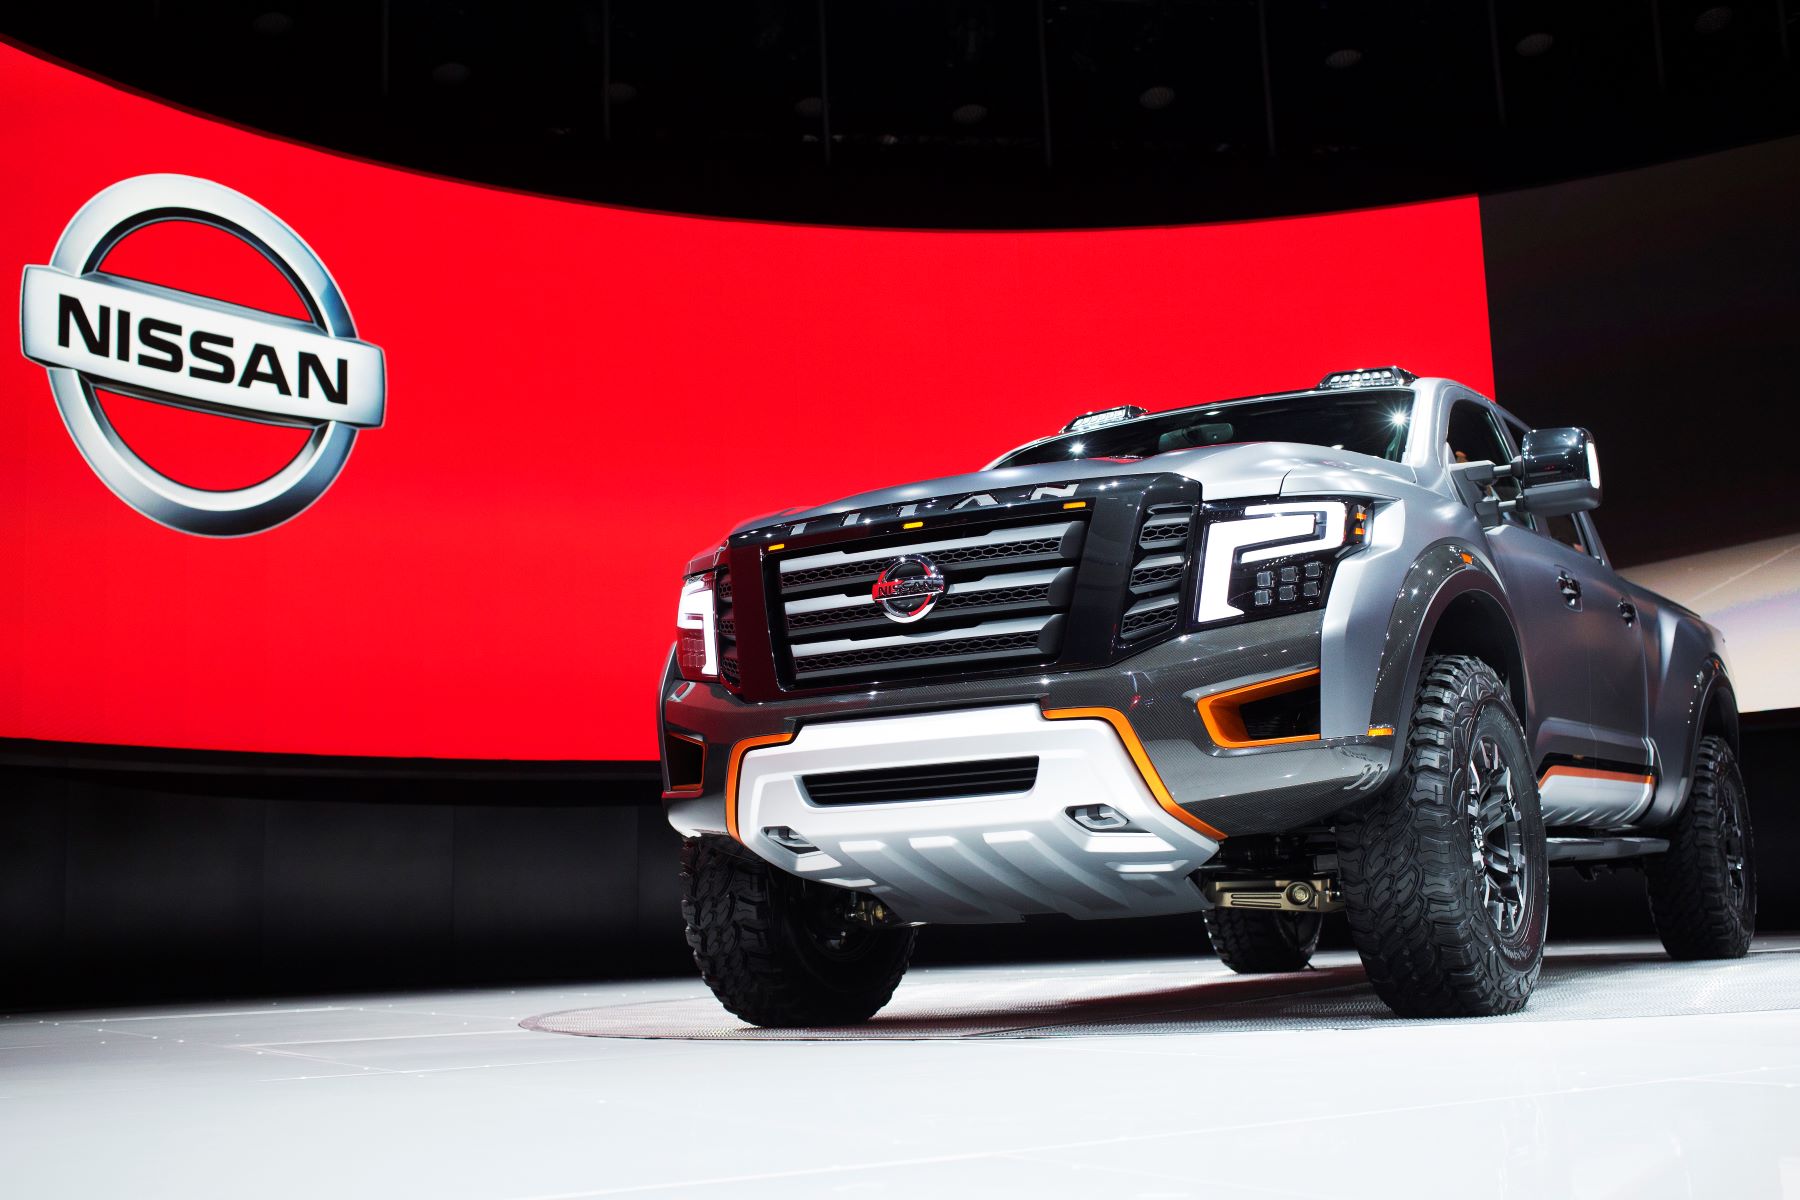 The Nissan Titan Warrior concept pickup truck debut at the Detroit Auto Show